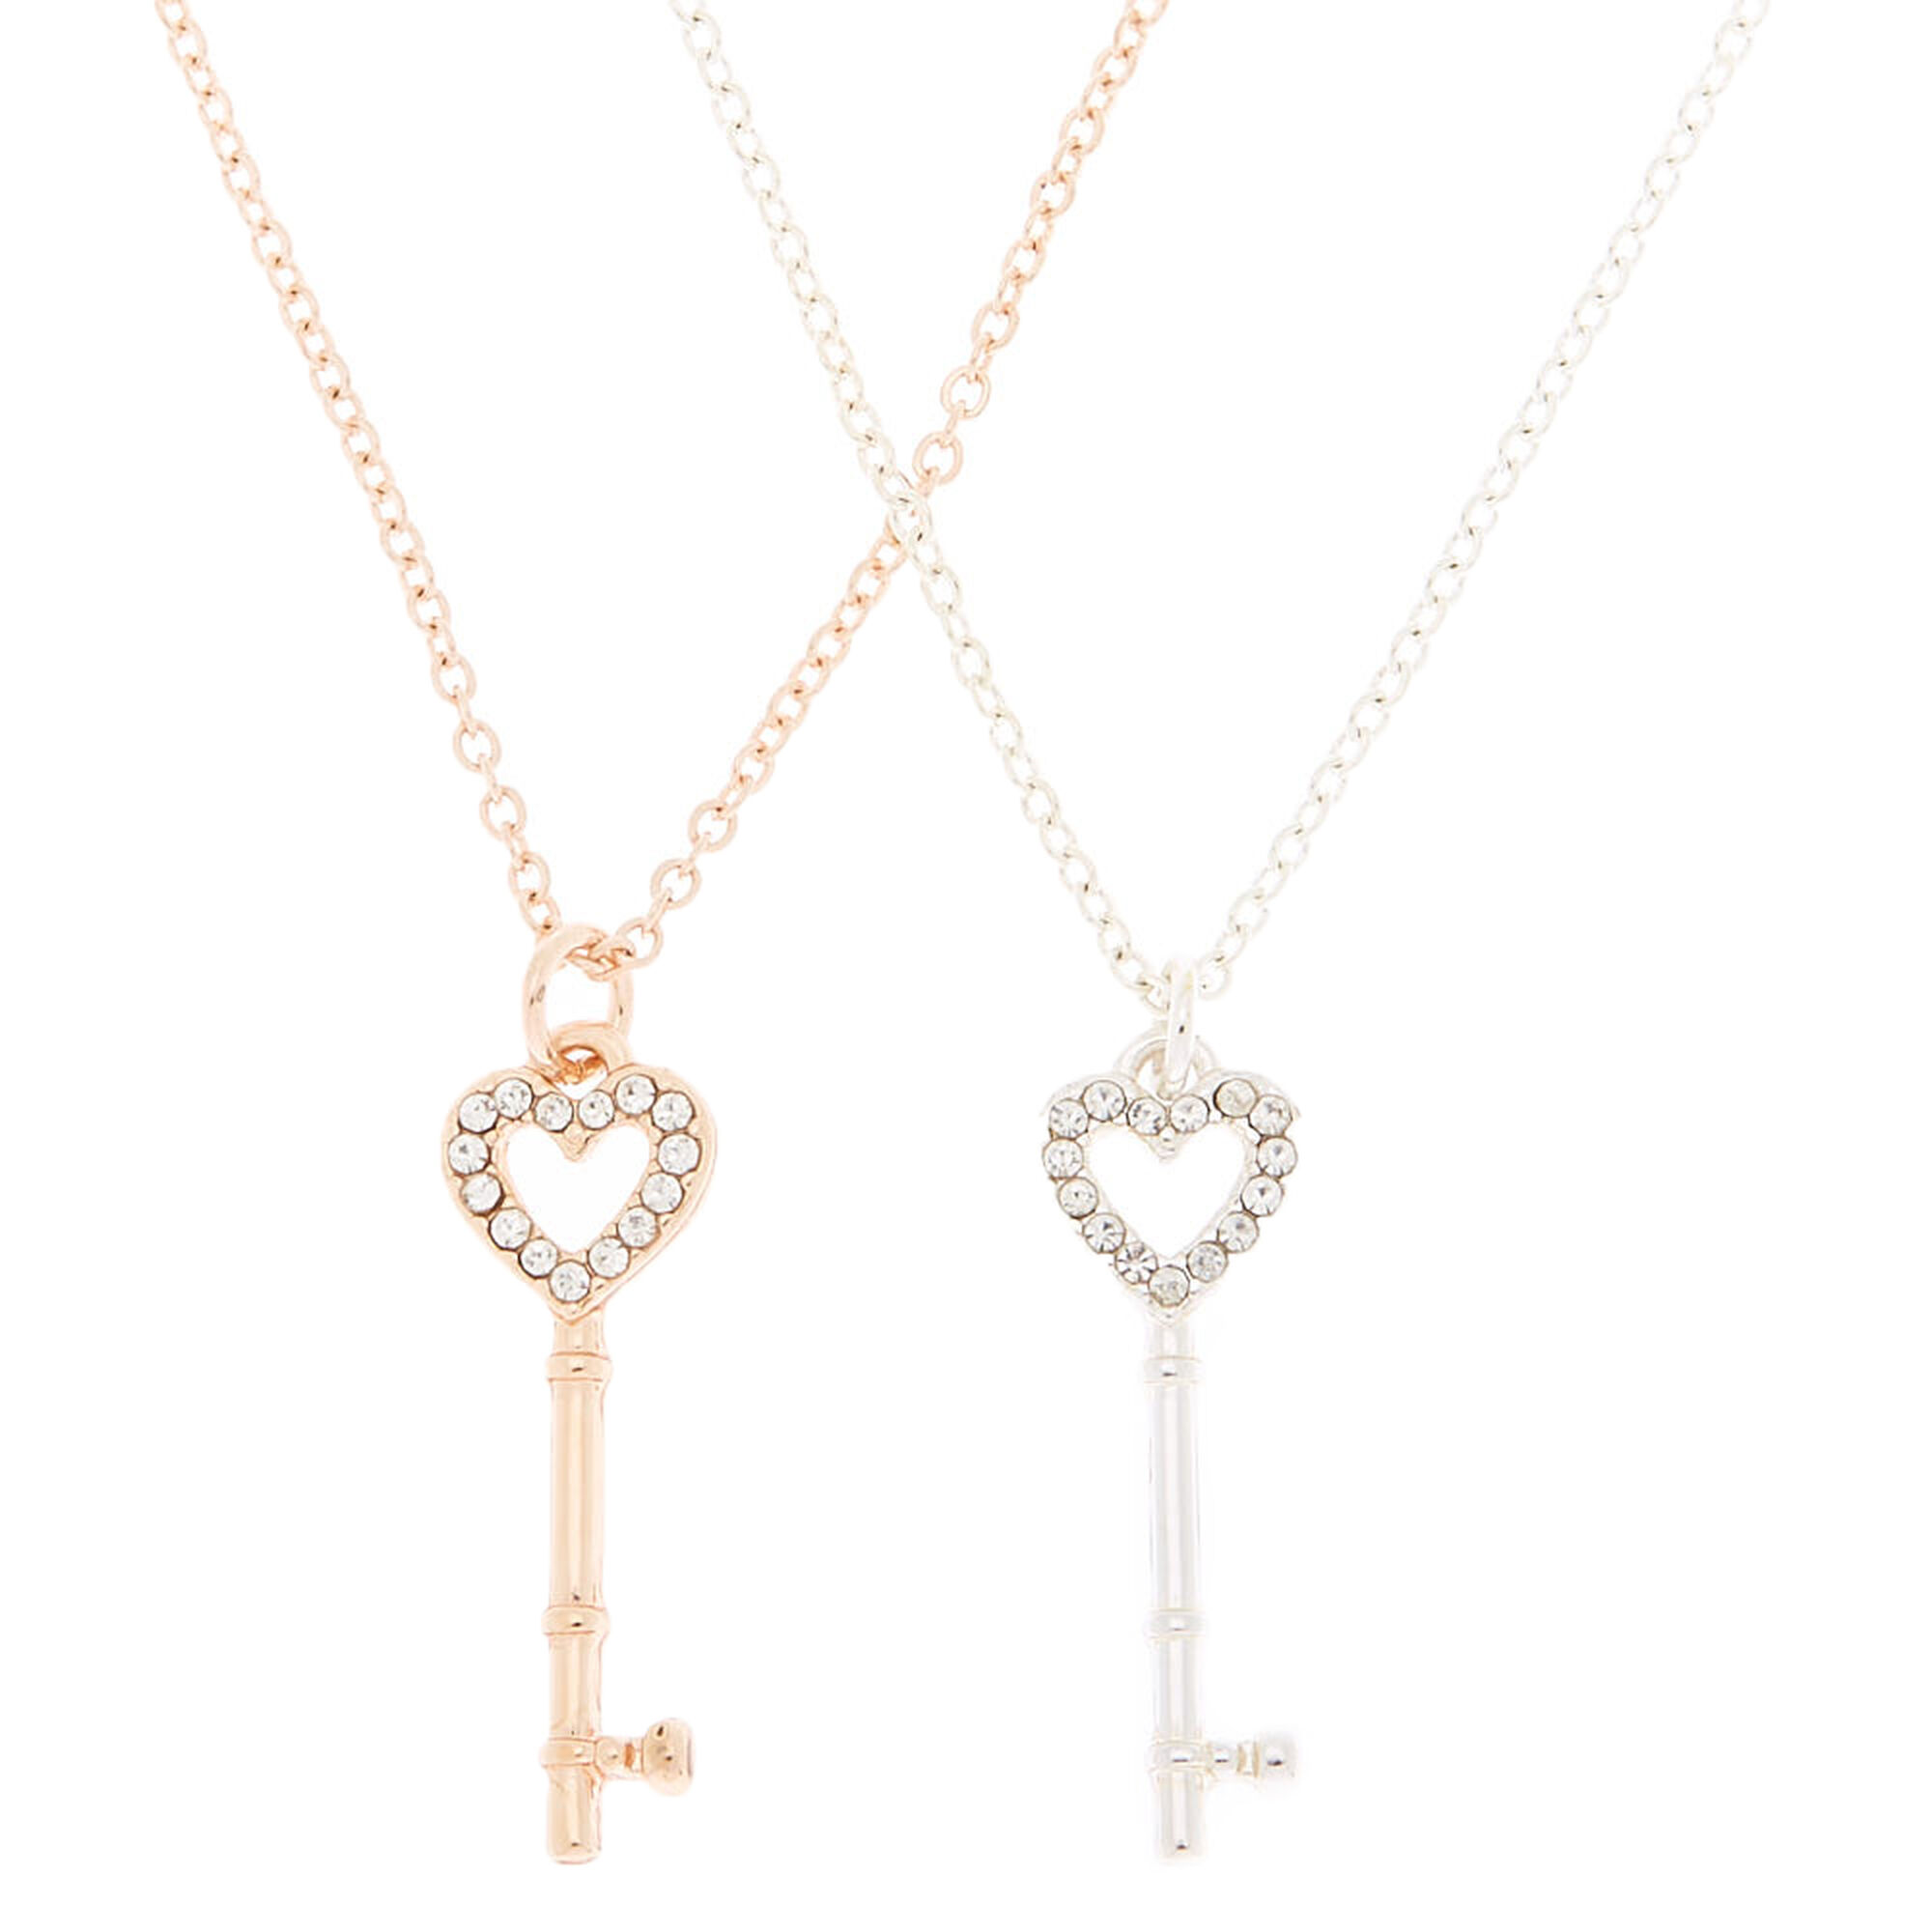 View Claires Mixed Metal Best Friends Key Pendant Necklaces 2 Pack Rose Gold information